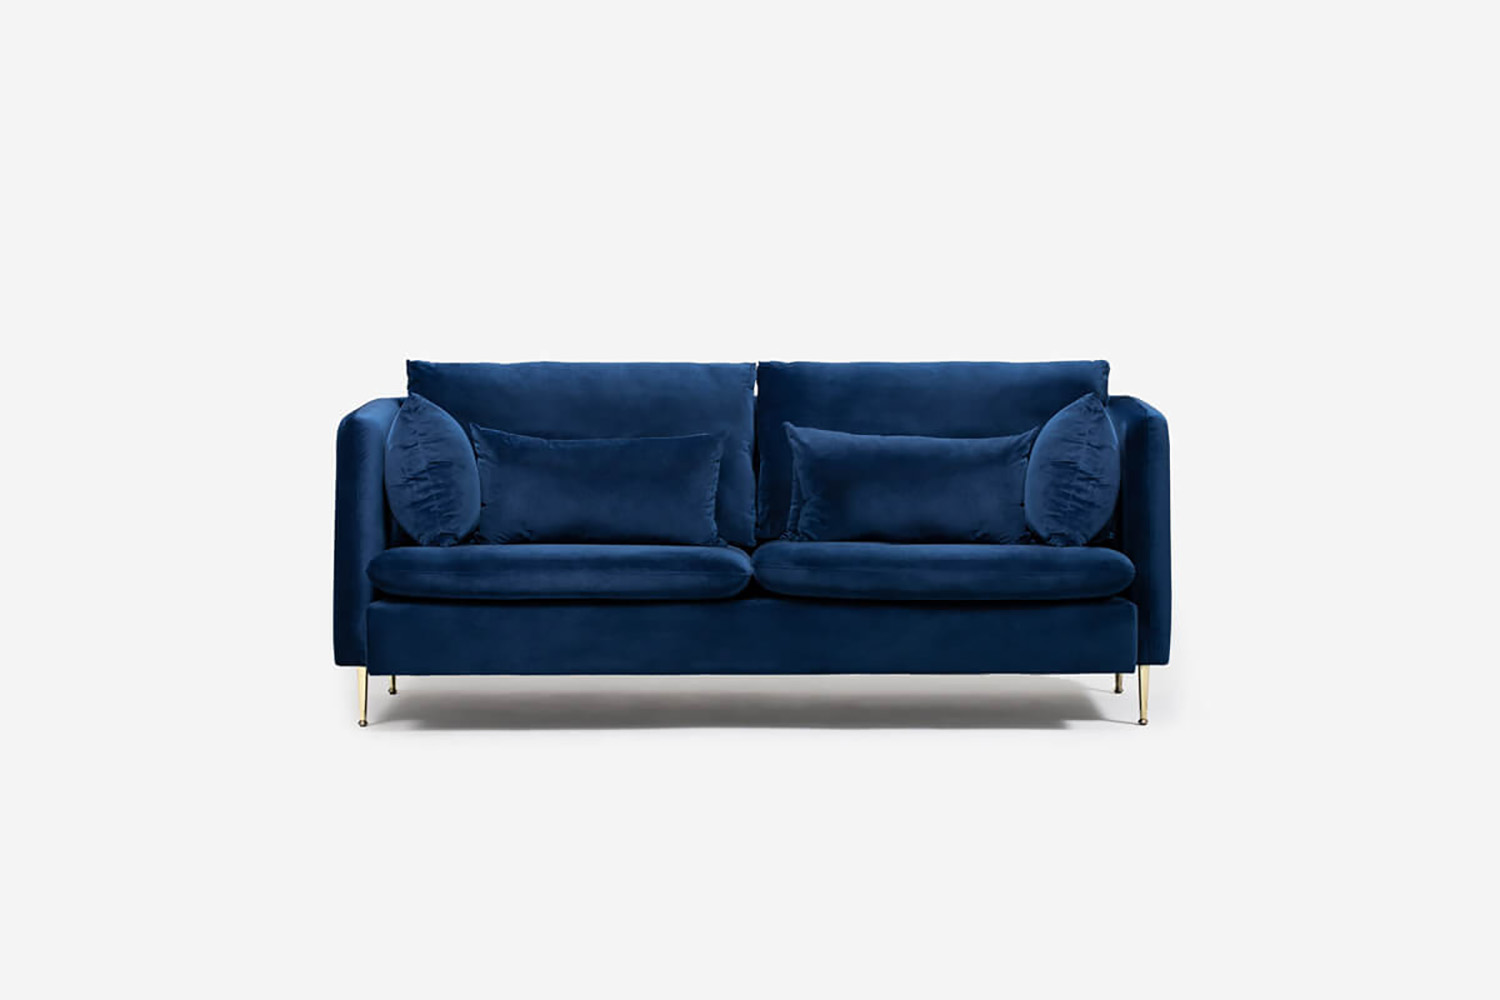 Sherman 3 Seater Velvet Couch Royal Blue, Bright Blue Leather Sofa